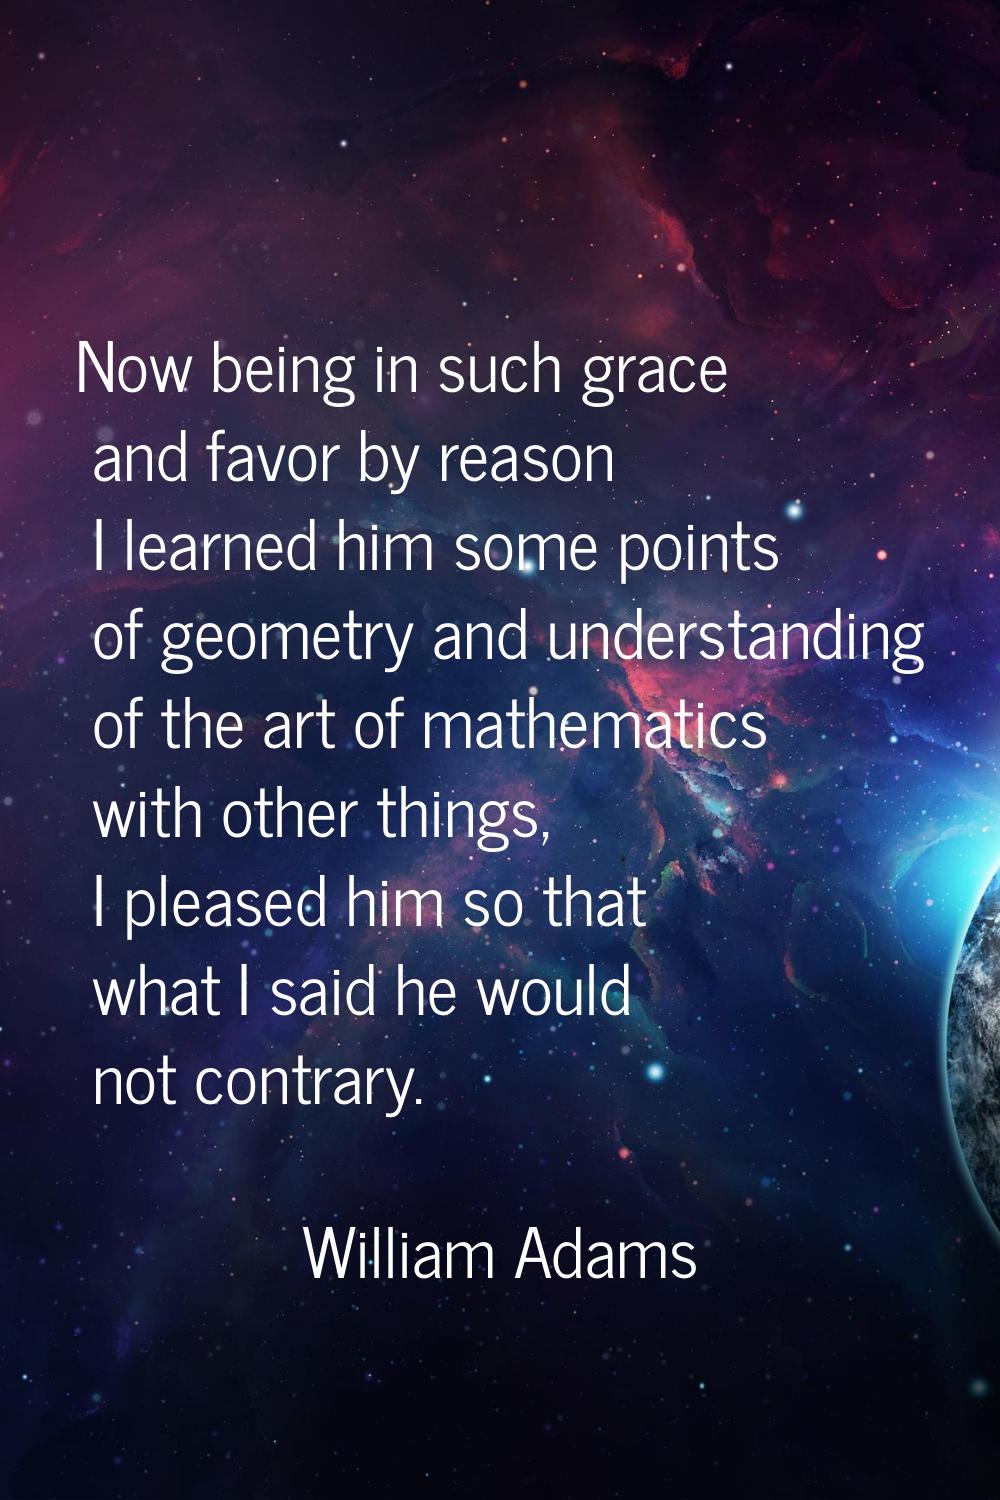 Now being in such grace and favor by reason I learned him some points of geometry and understanding